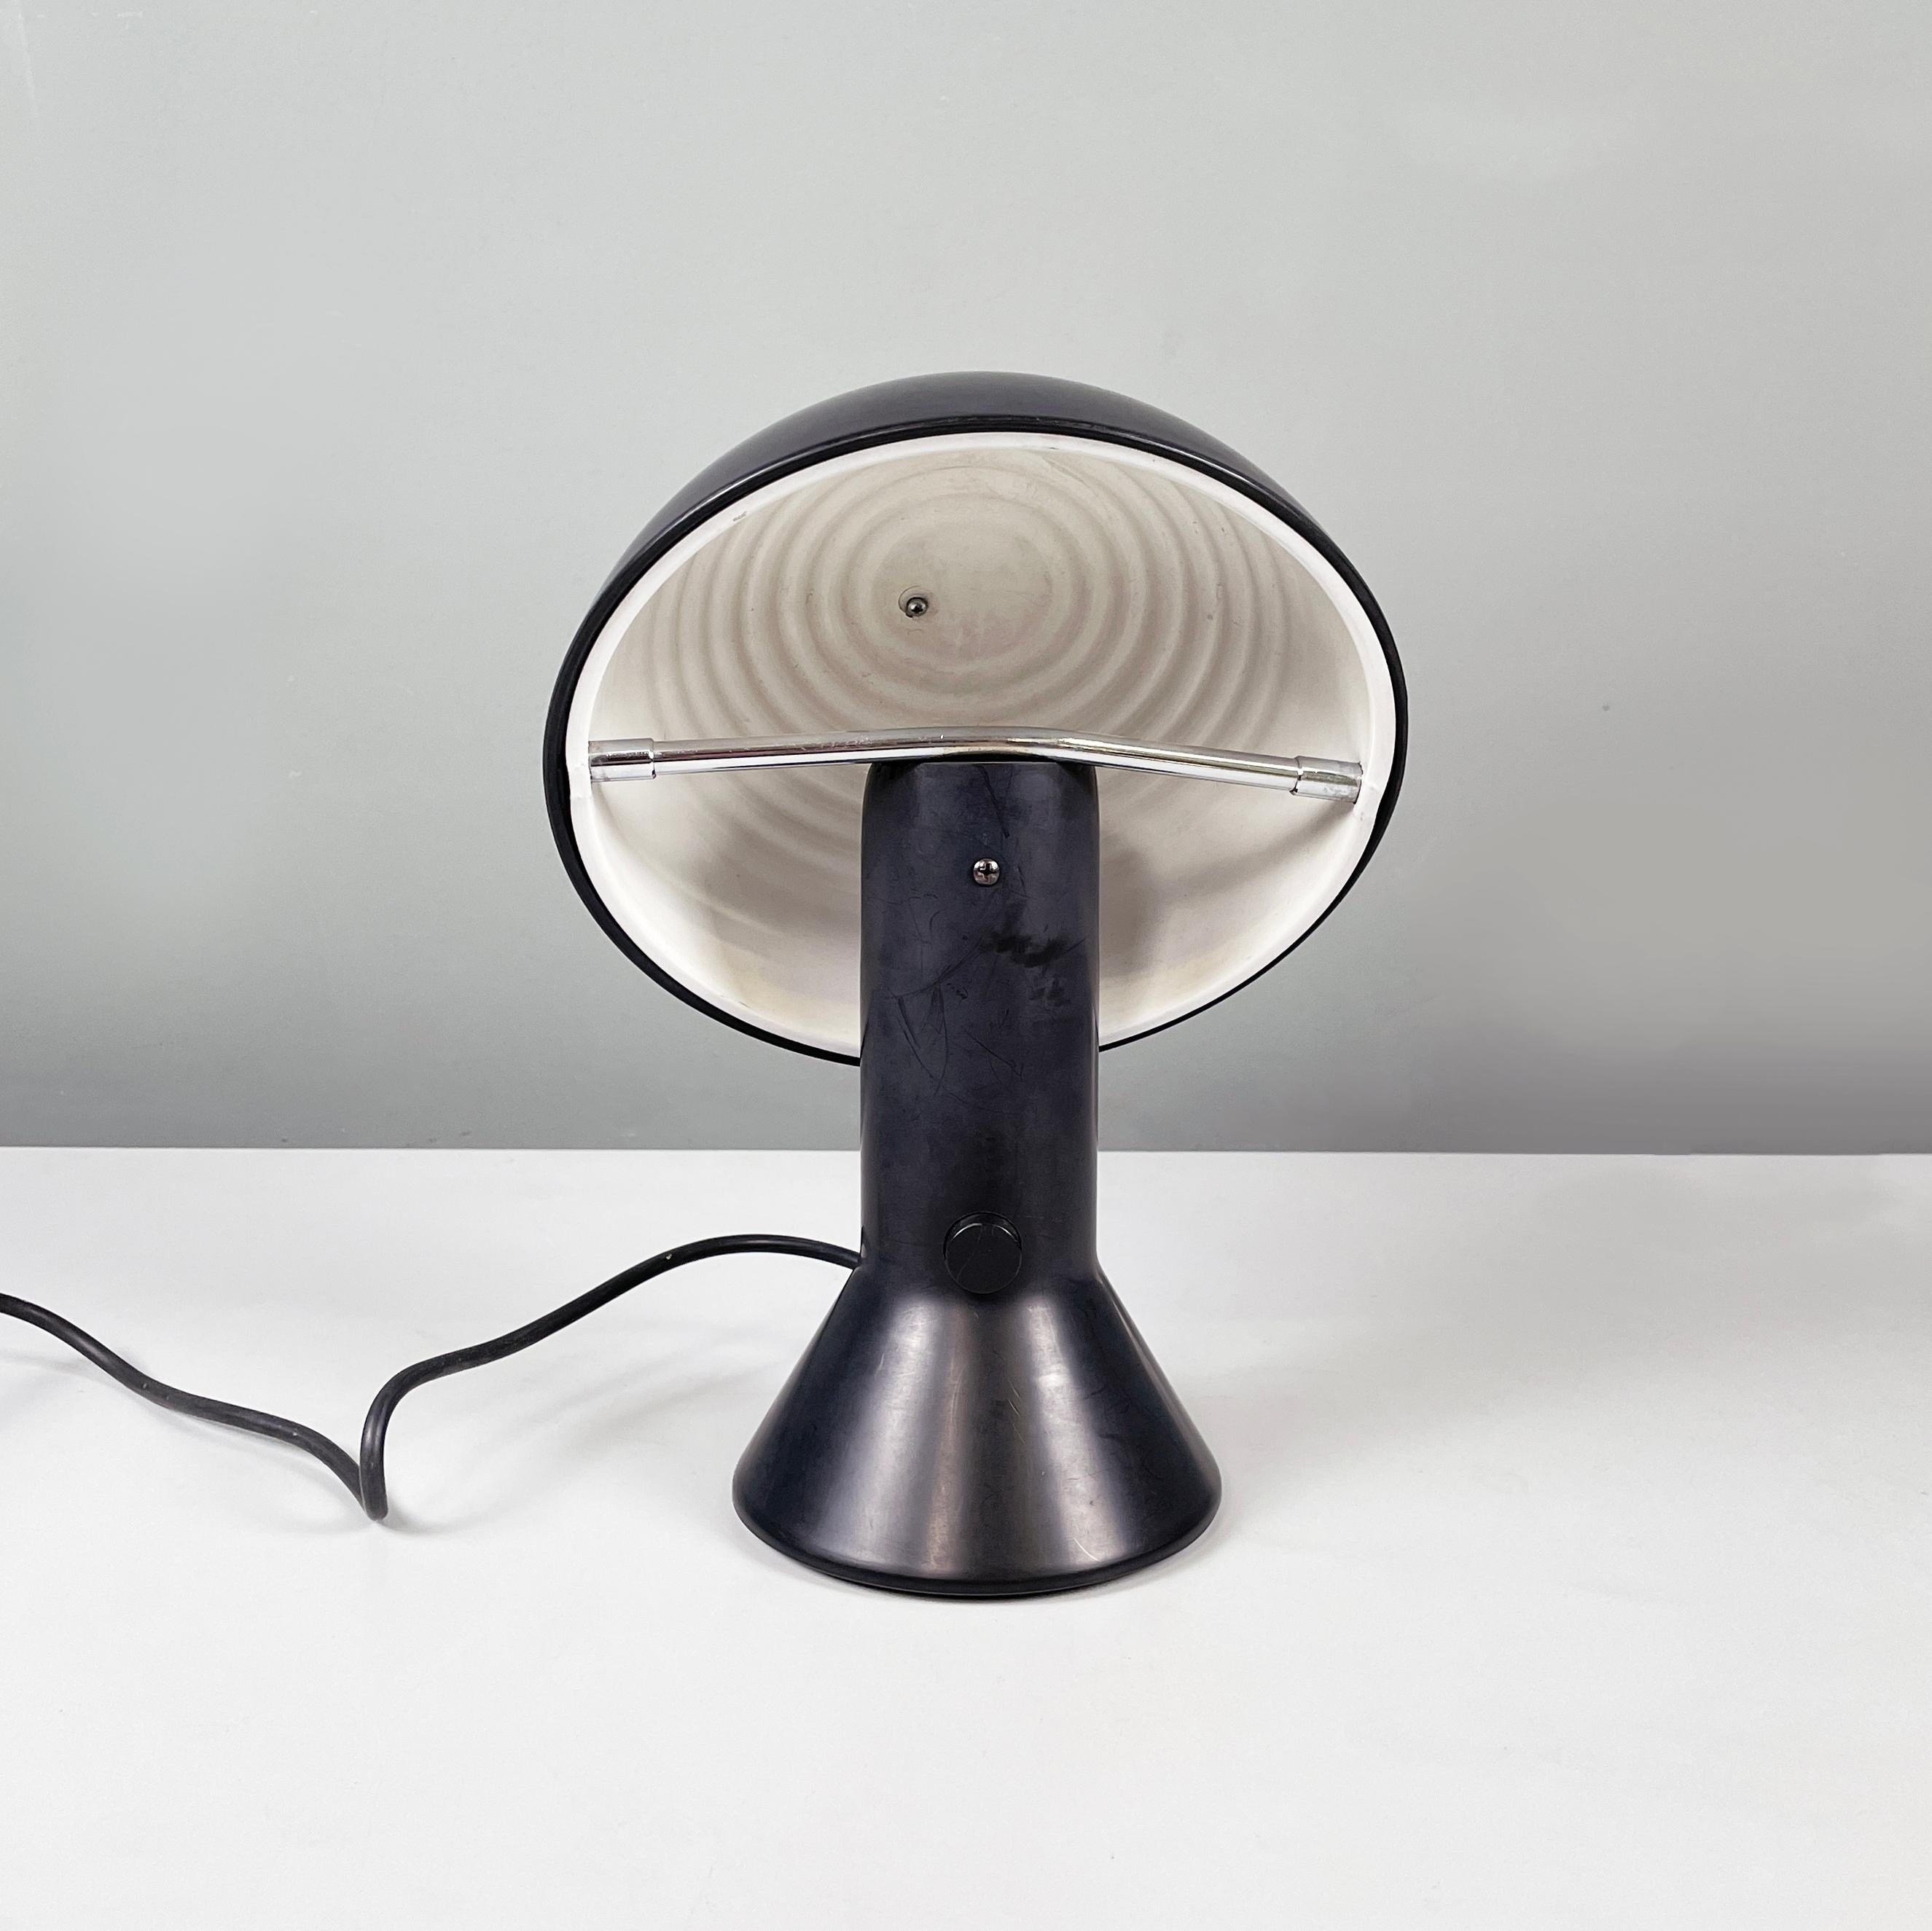 Modern Italian modern Plastic adjustable table lamp Elmetto by Martinelli Luce, 1980s For Sale